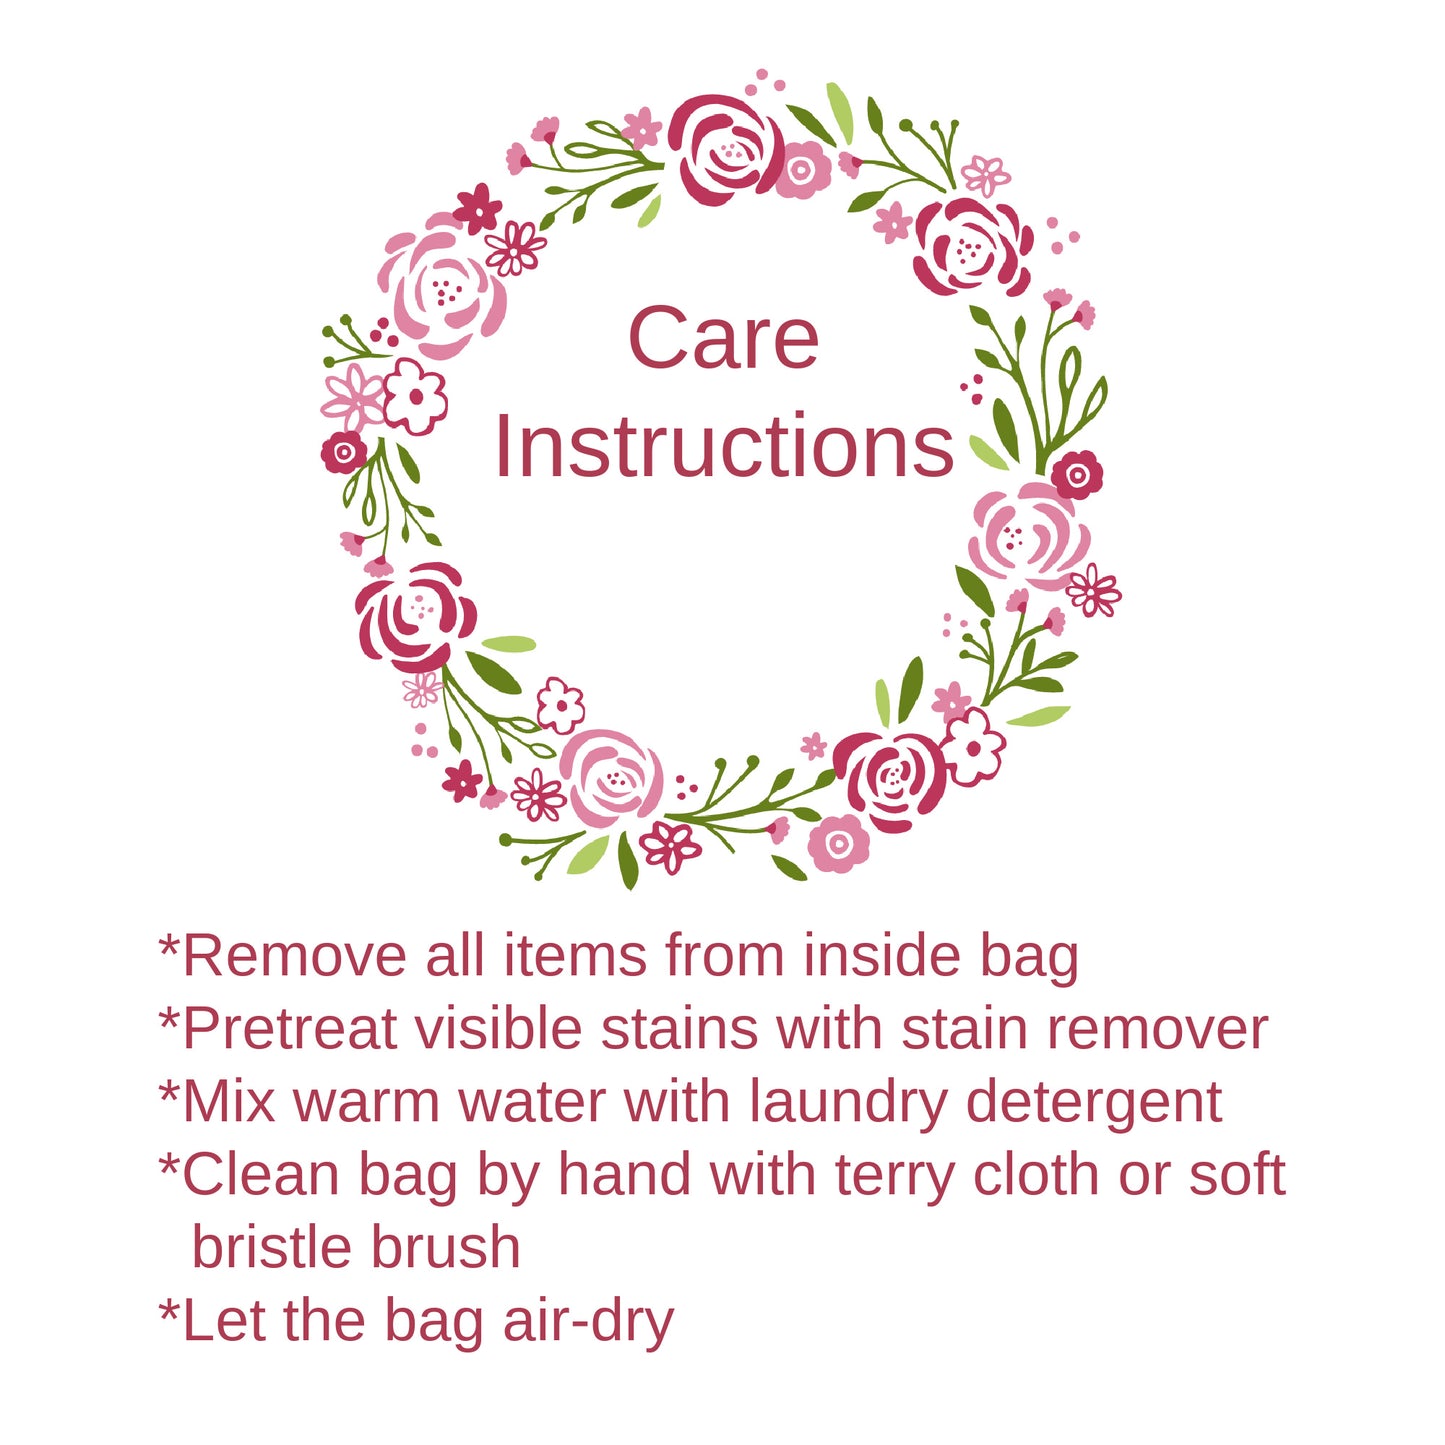 Photo of the Care Instructions